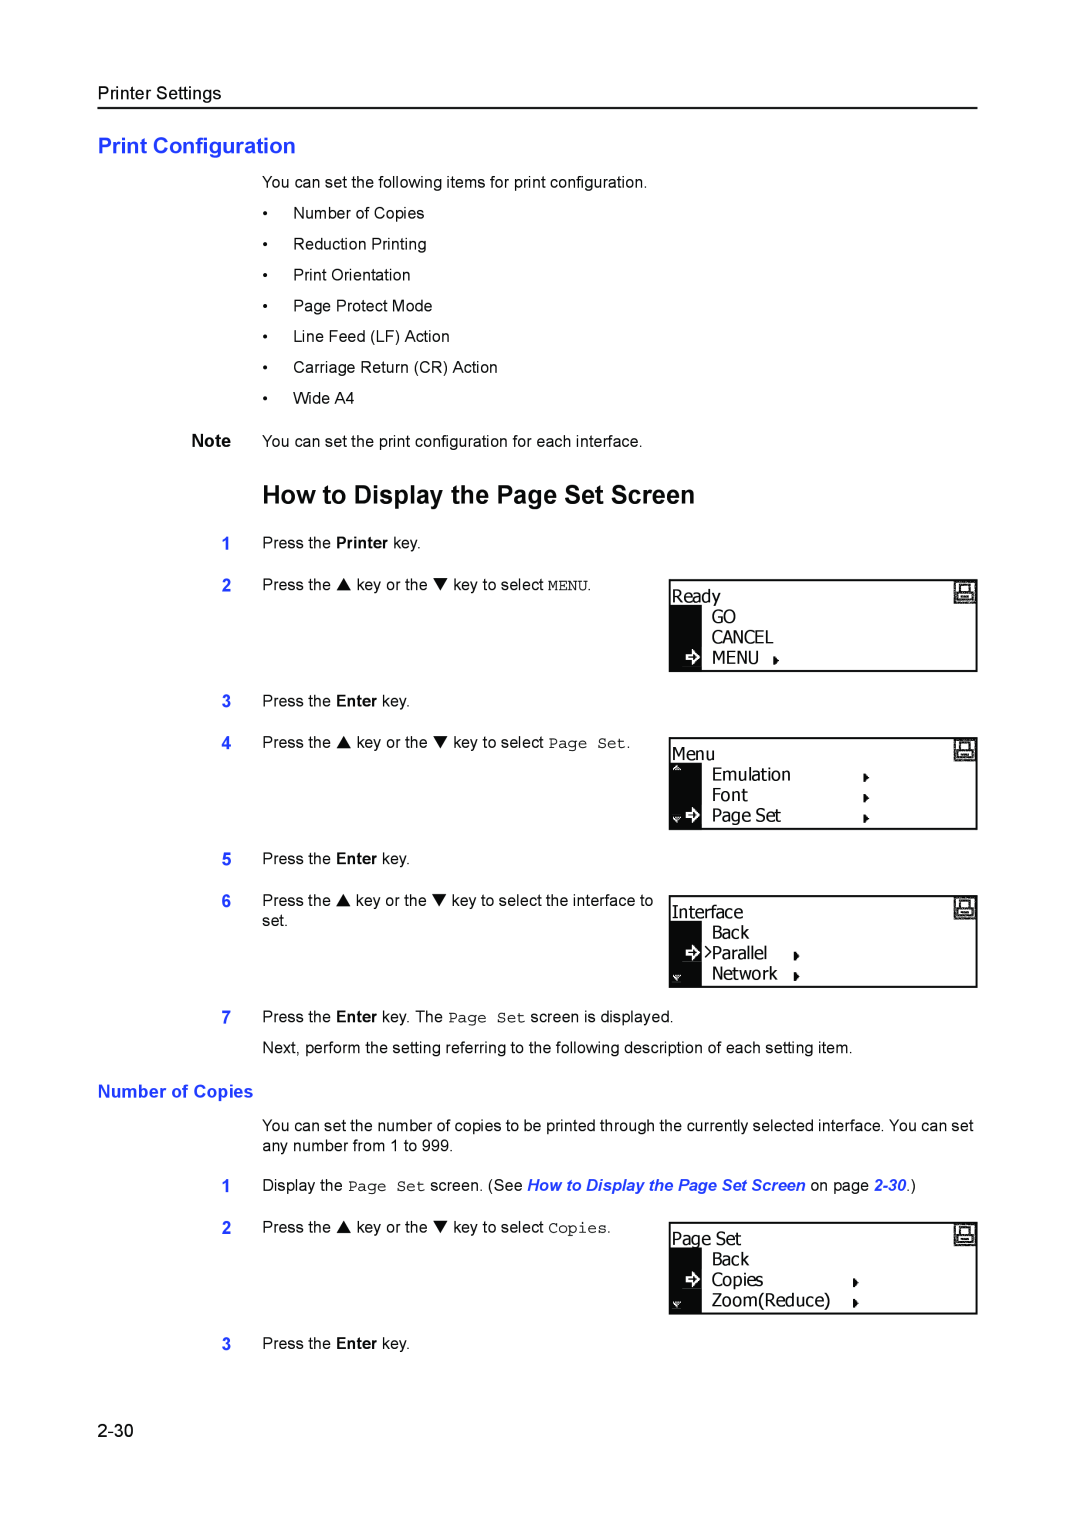 Kyocera 1650, 2050, 2550 How to Display the Page Set Screen, Print Configuration, Number of Copies, 2-30, Printer Settings 